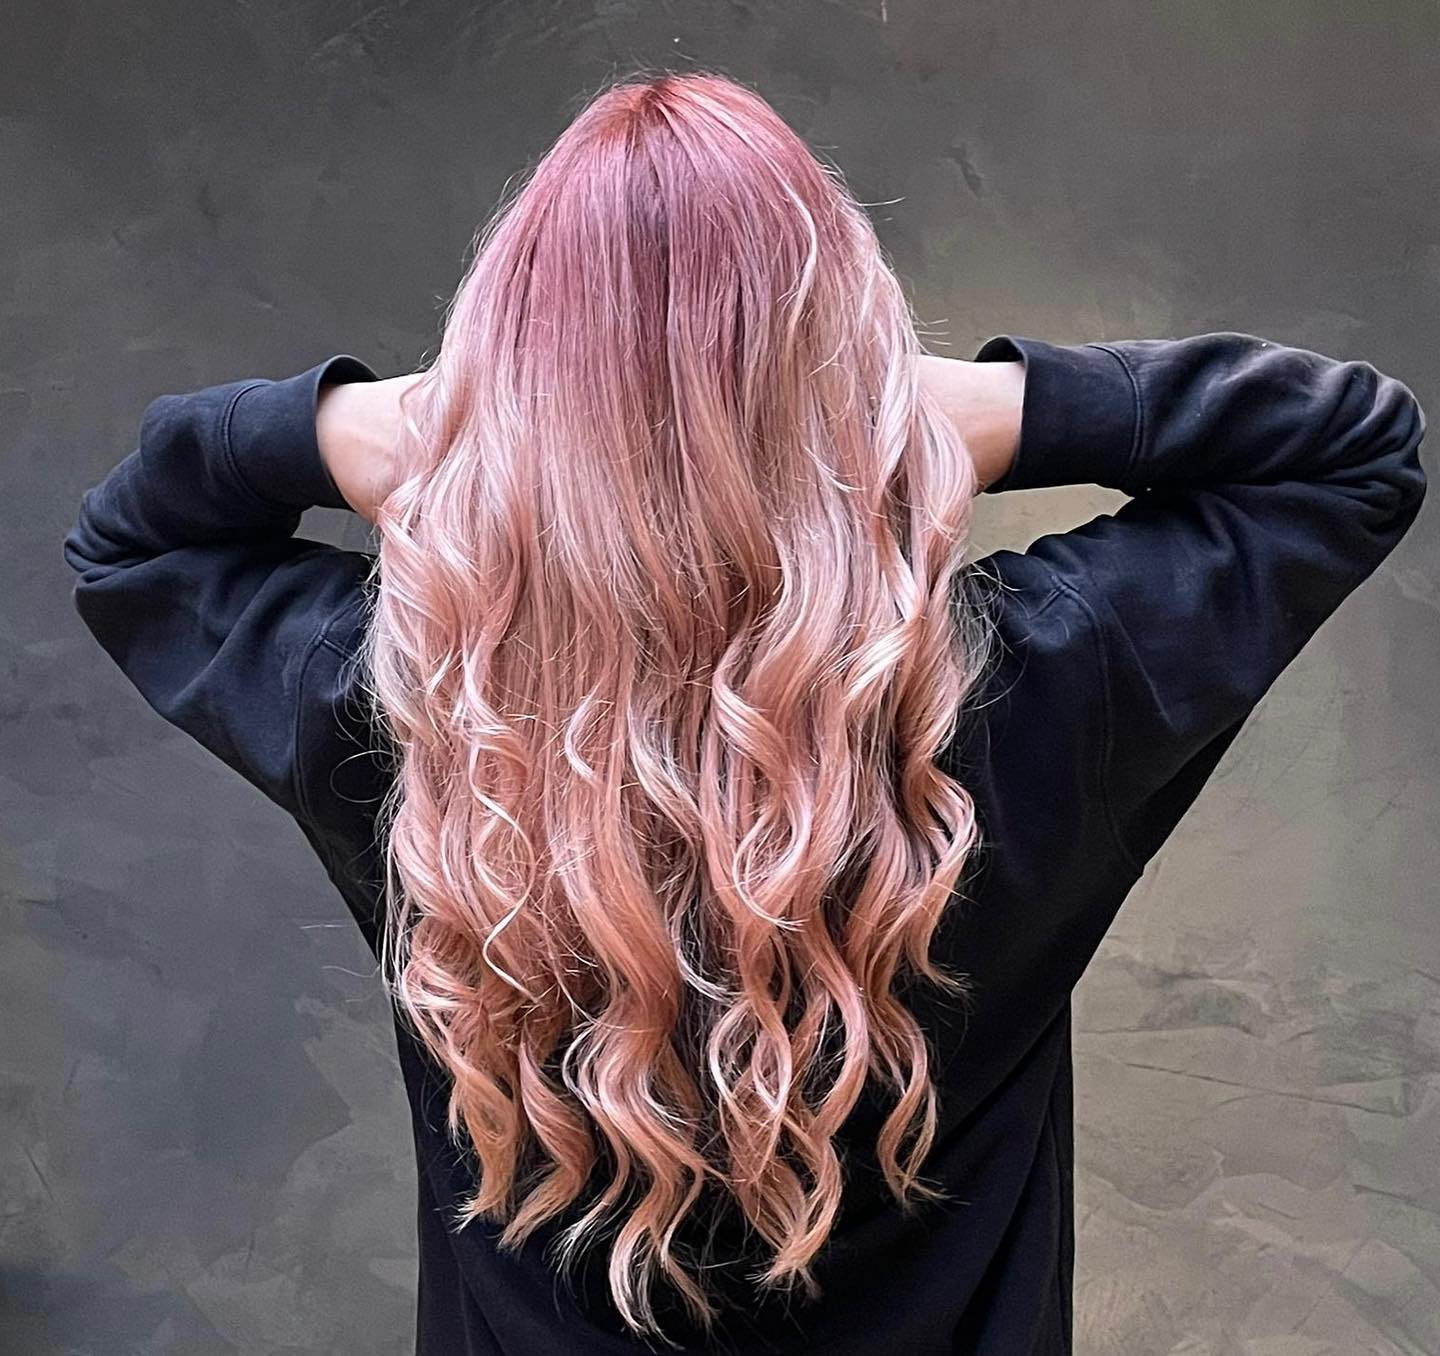 pink ombre hair color 36 Ombre pink hair blonde | Pastel pink ombre hair | Pink balayage Hair Pink Ombre Hair Color for Women